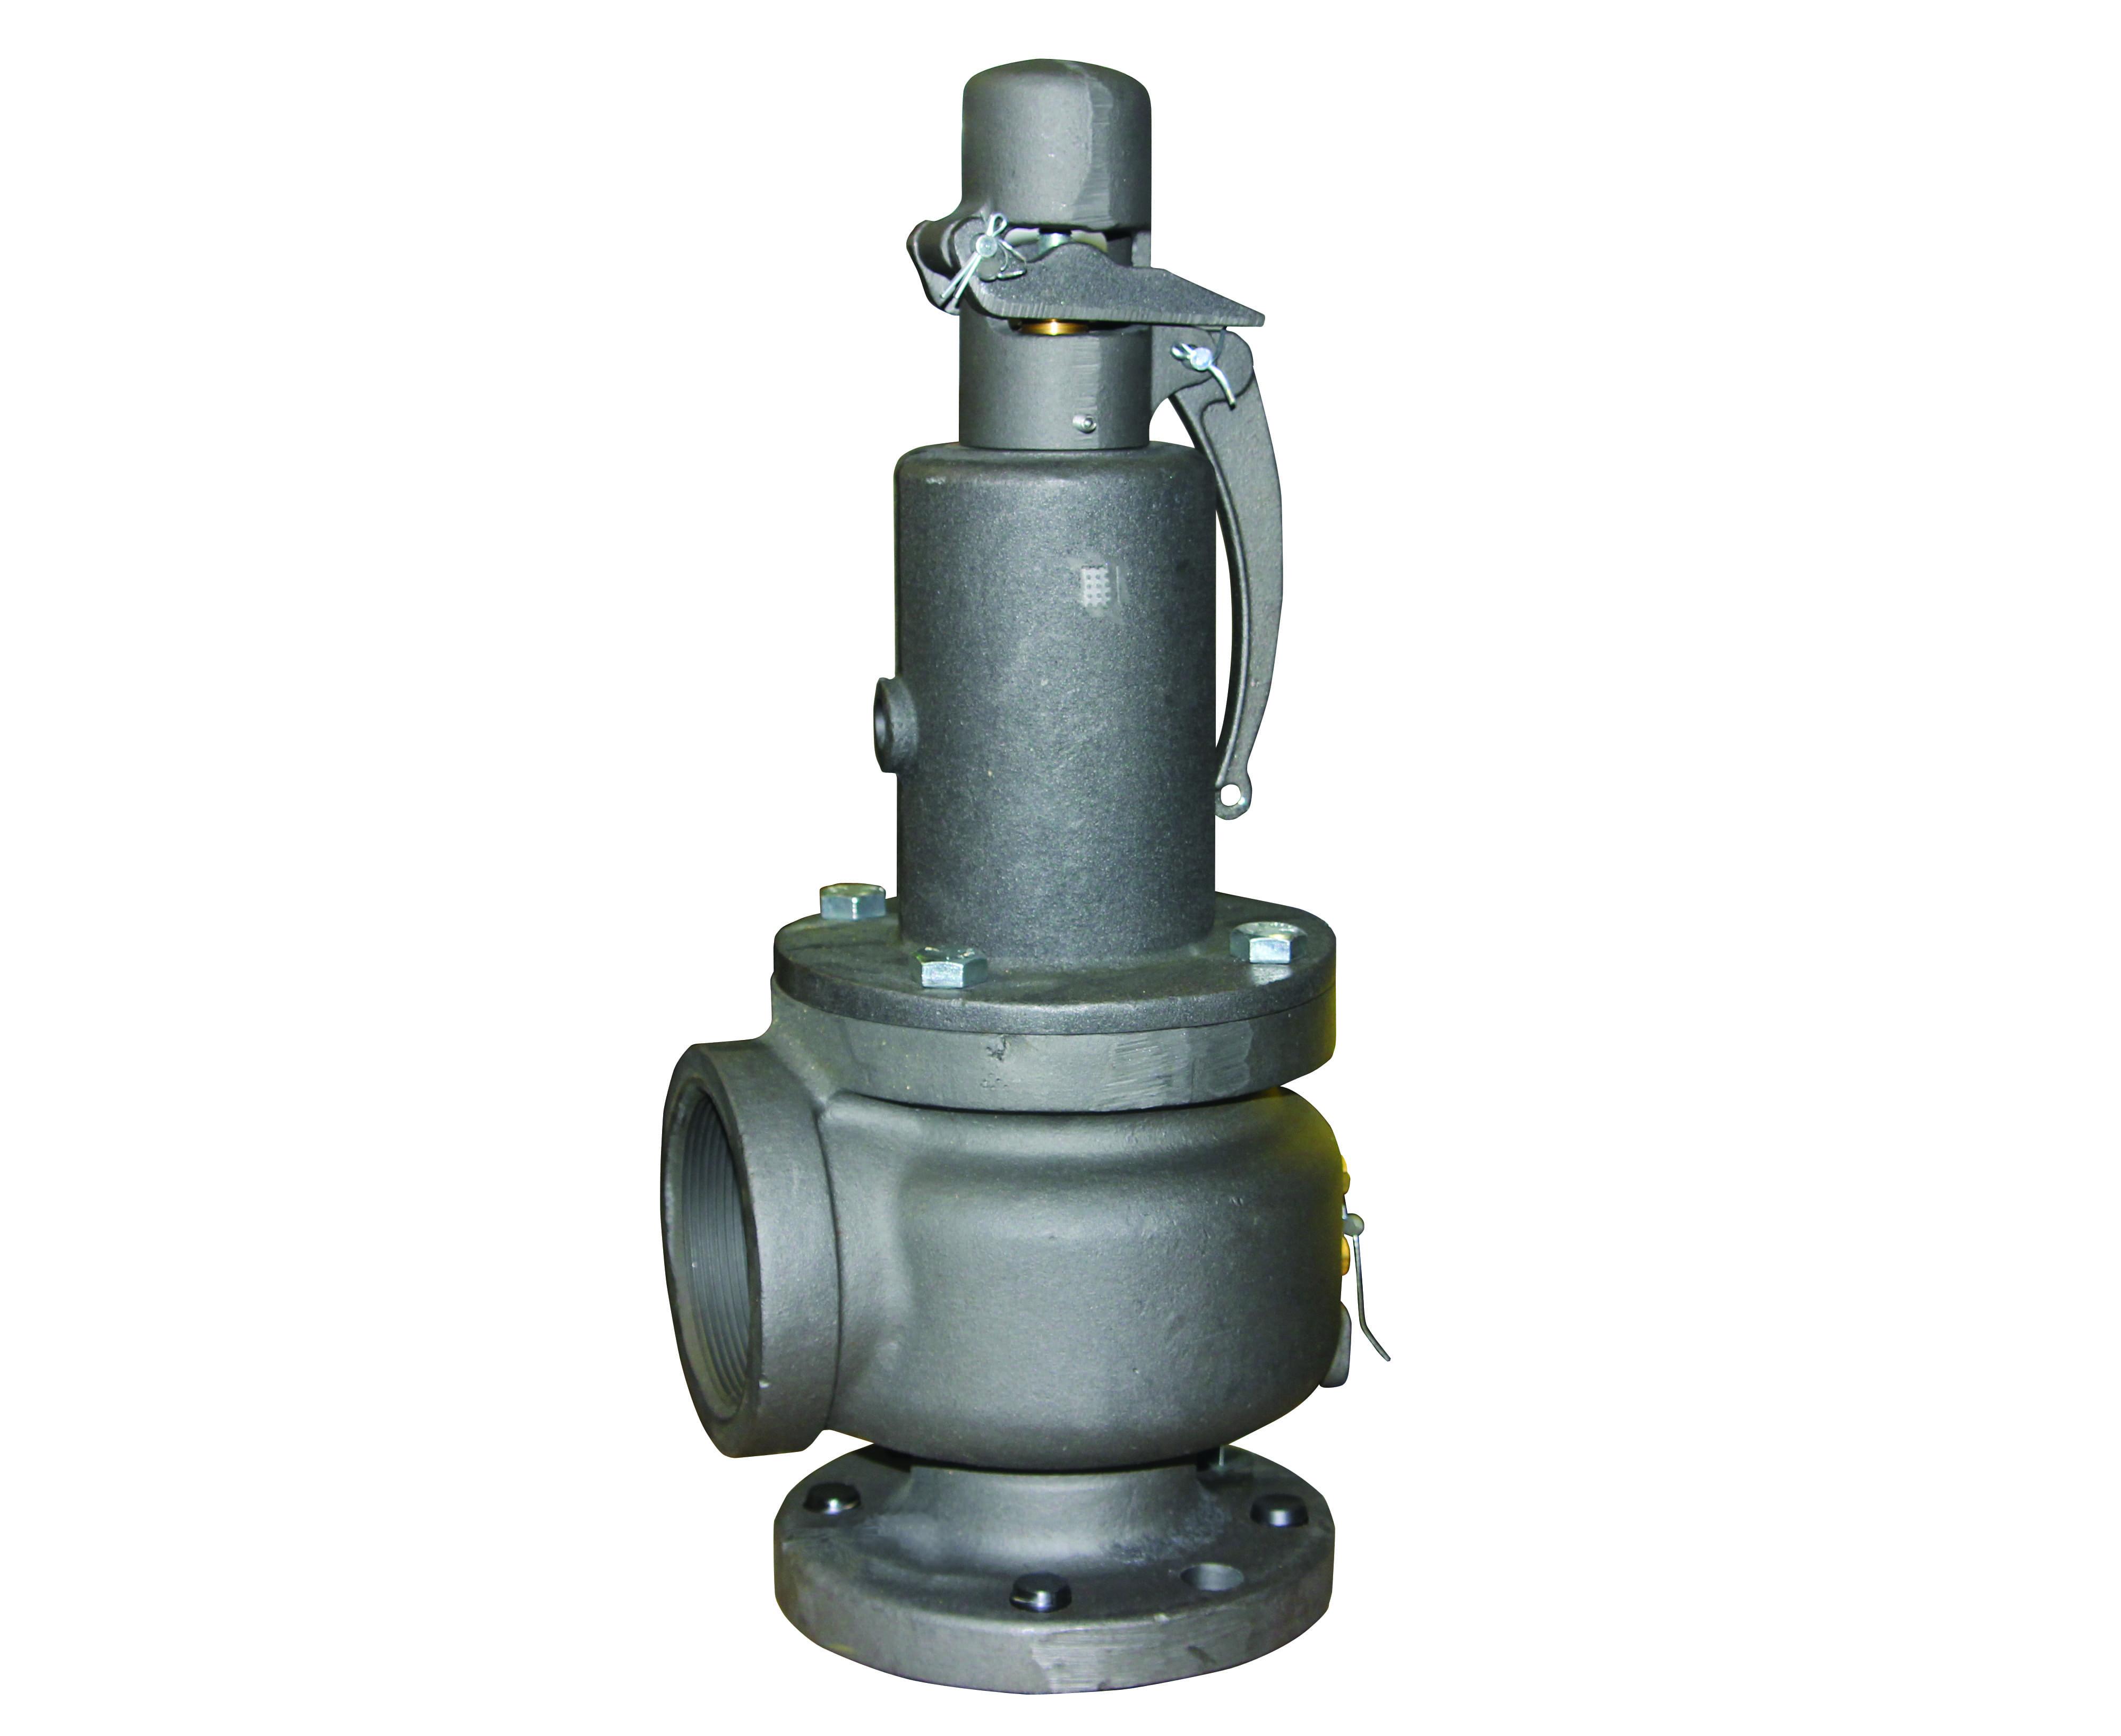 Preview image for Apollo ASME Section VIII Steam Cast Iron Safety Relief Valve, 3" X 4" (Flange x FNPT)